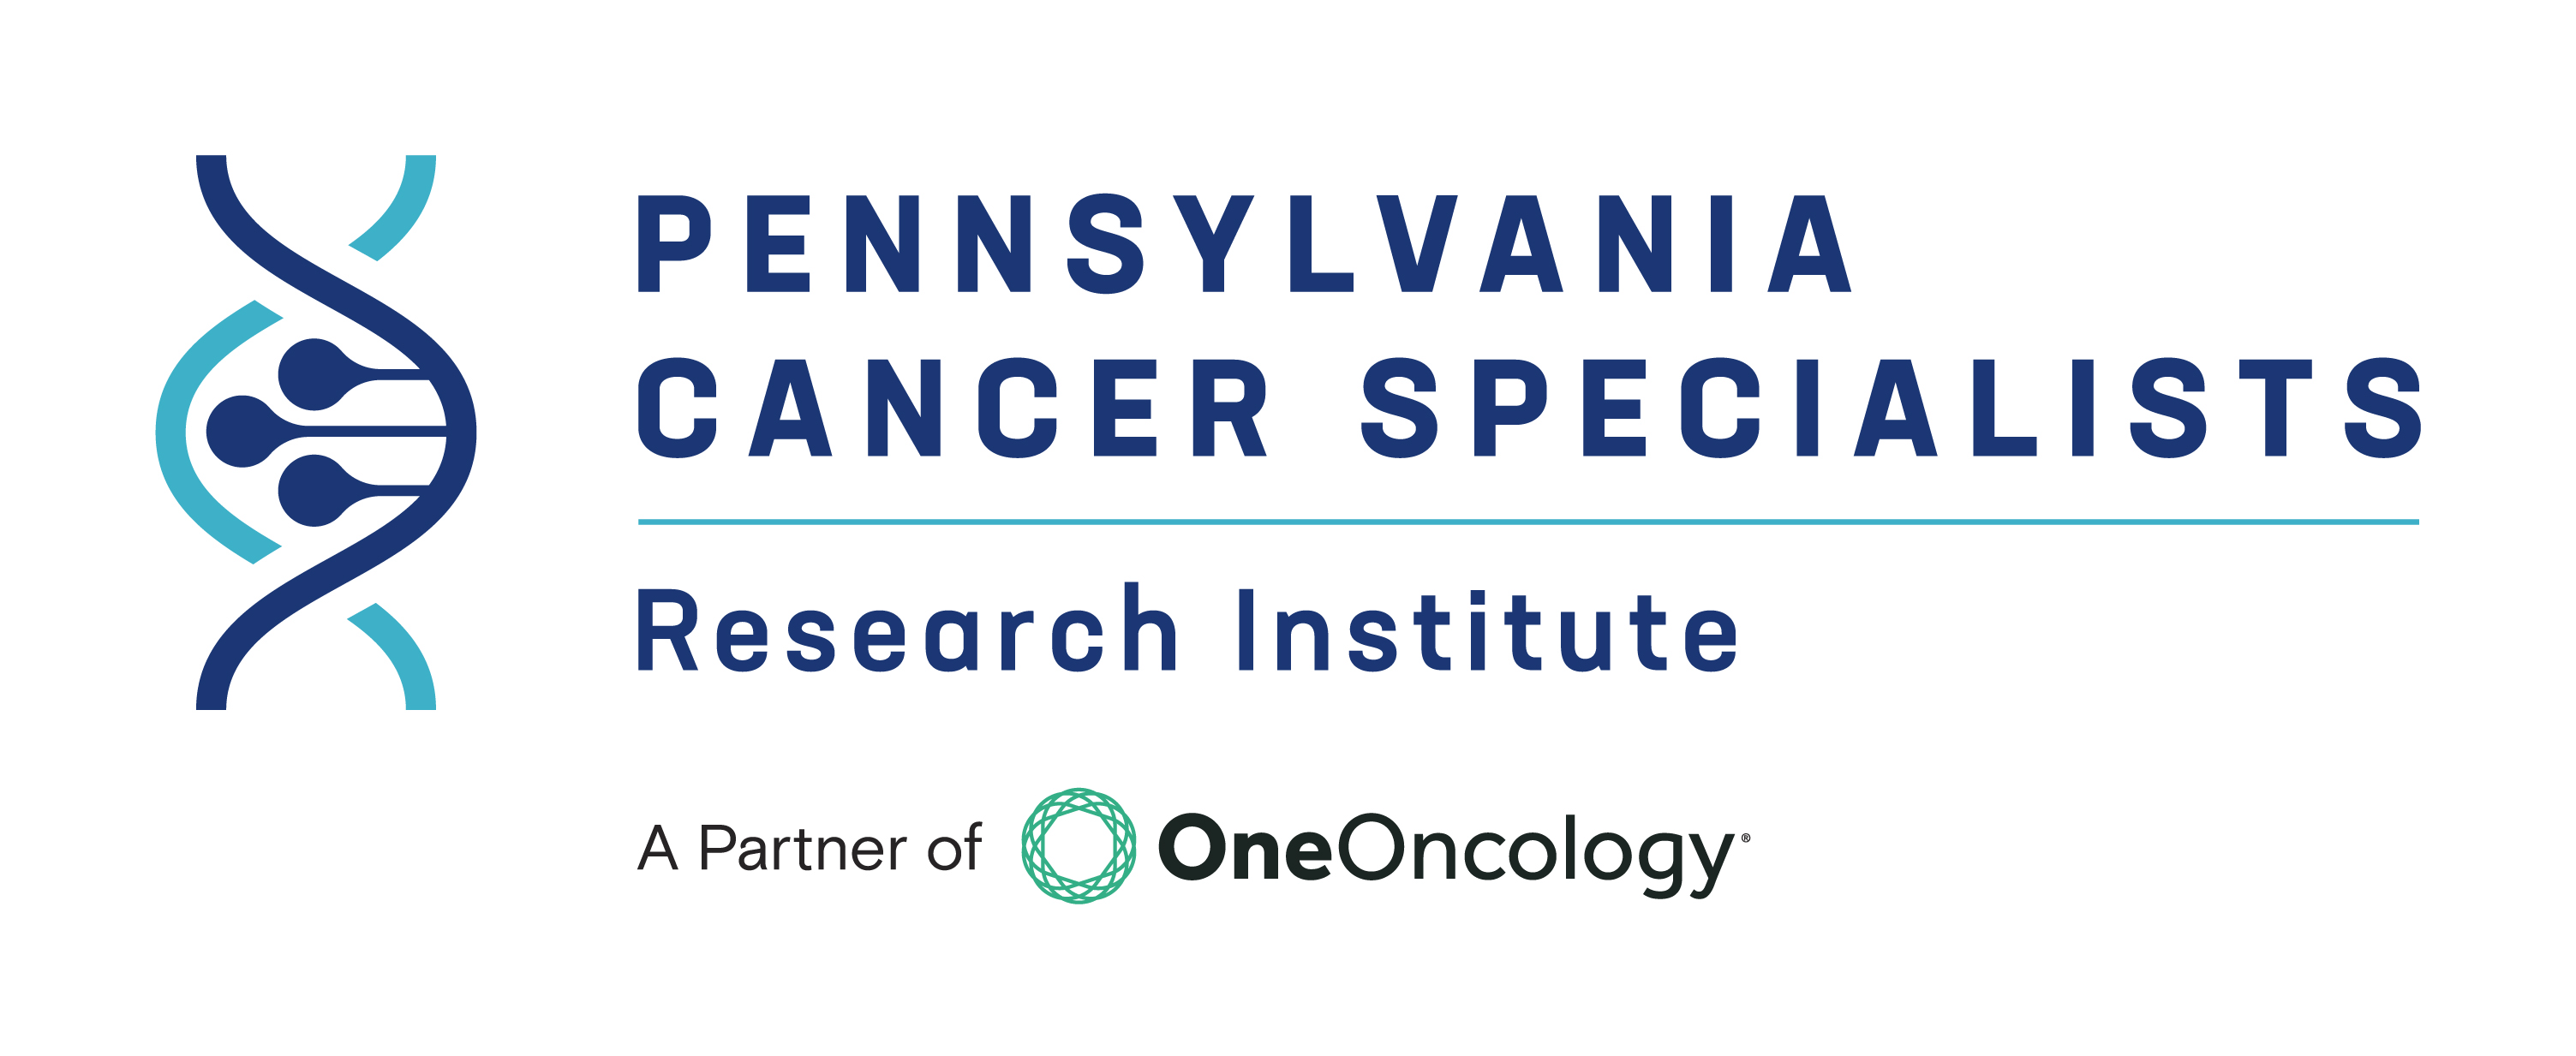 Pennsylvania Cancer Specialists & Research Institute